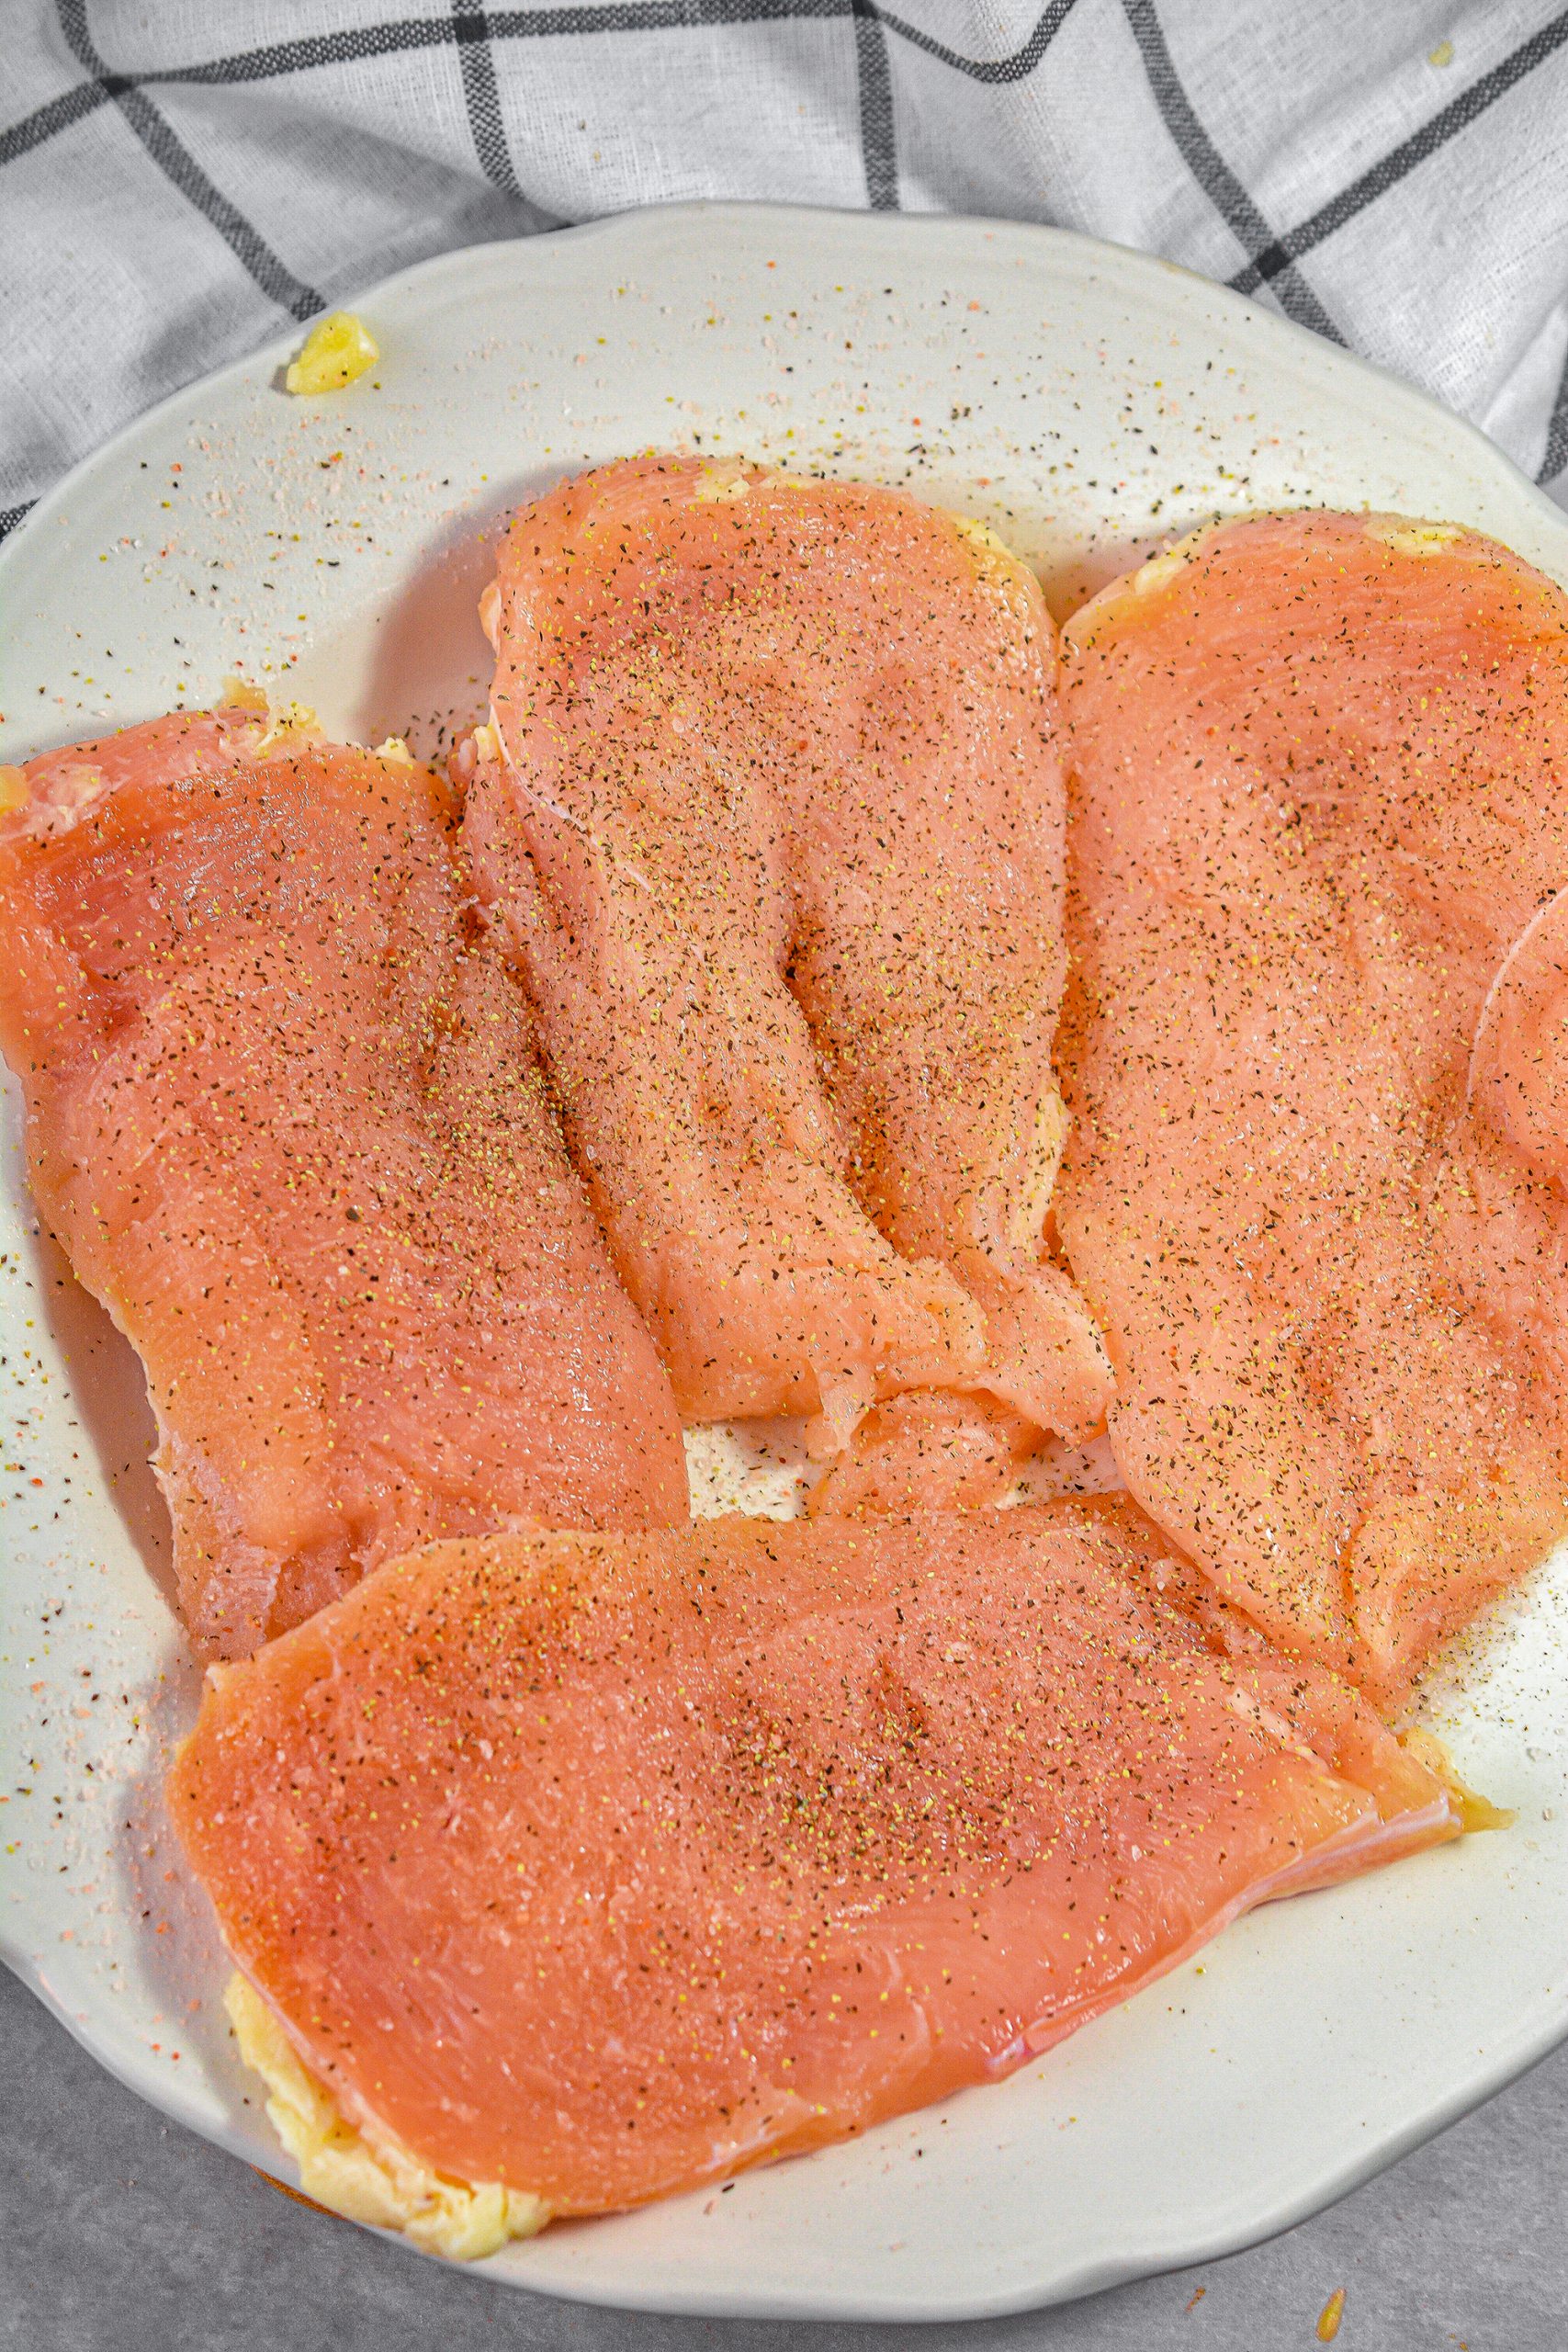 Season the chicken breasts with salt and pepper.